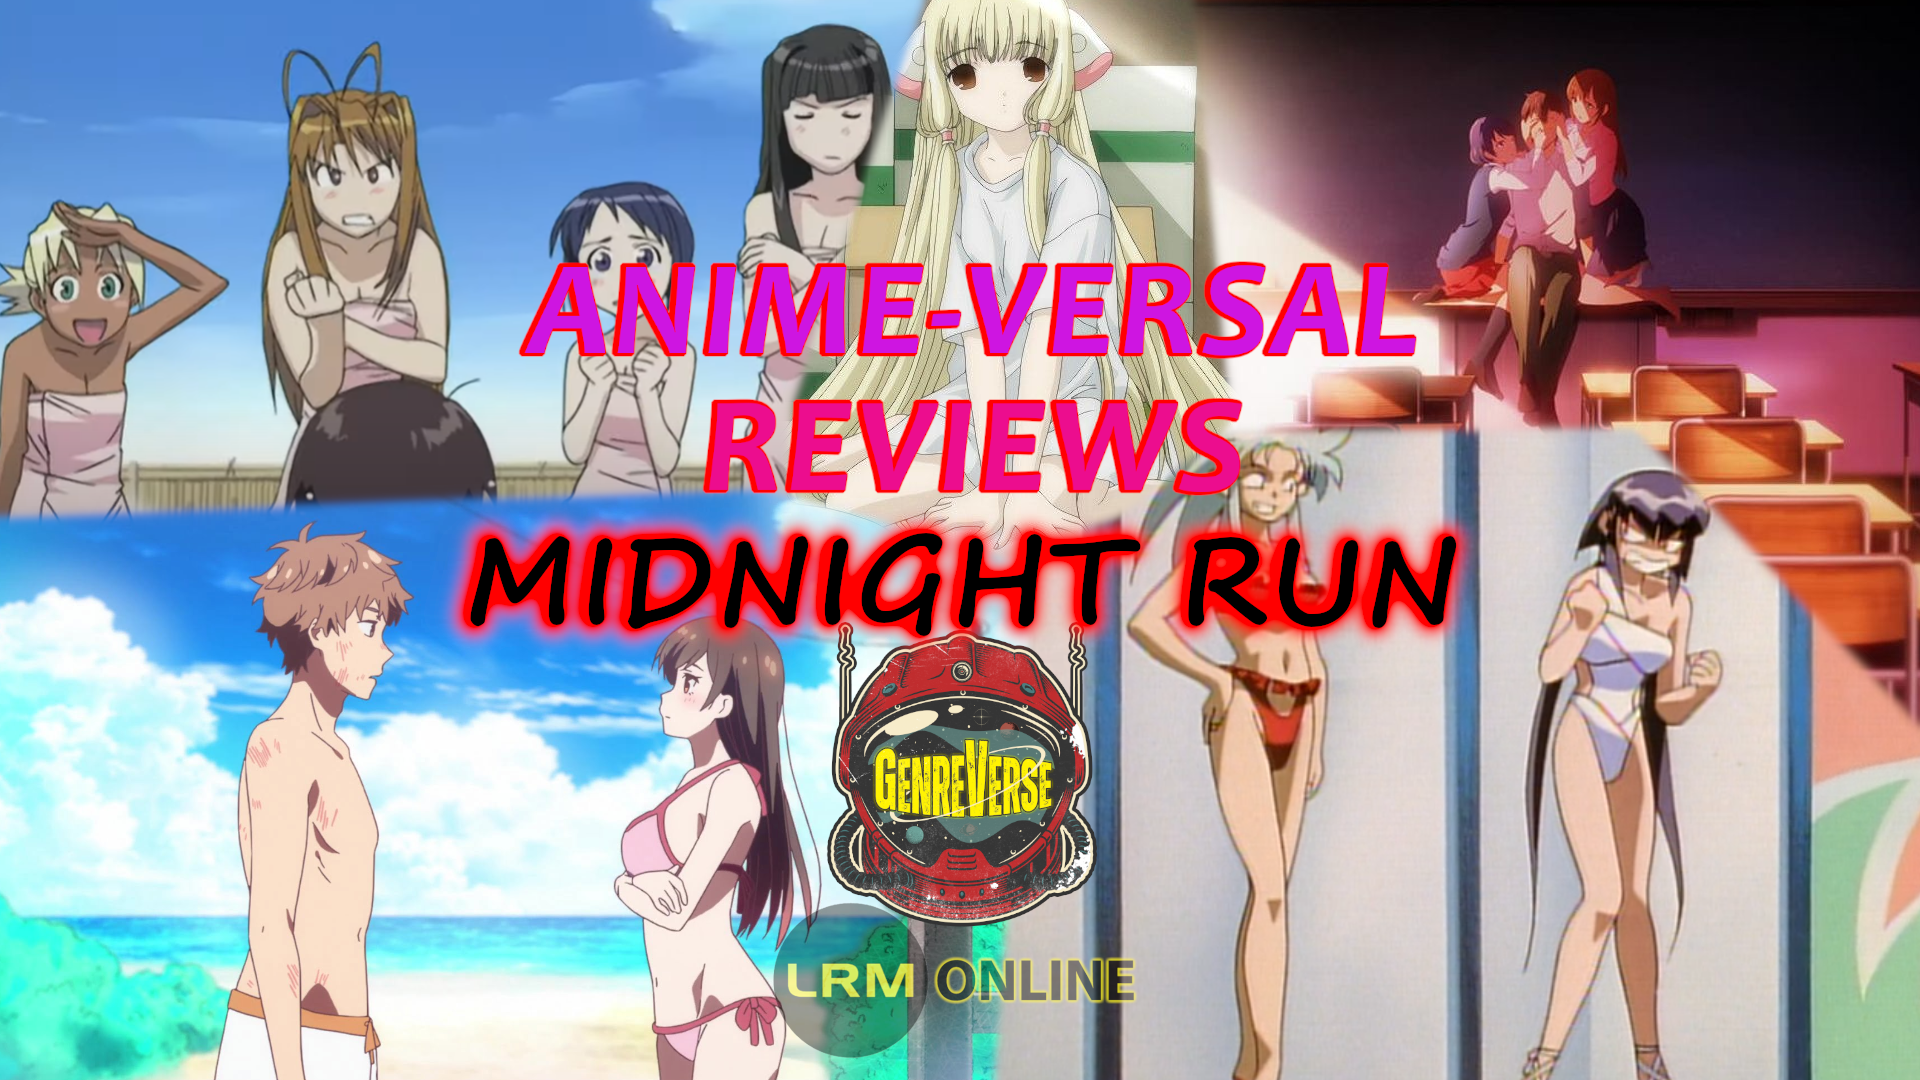 Let’s Talk Spicy Anime With Chobits, Tenchi, Rent-A-Girlfriend And More | Anime-Versal Reviews: Midnight Run